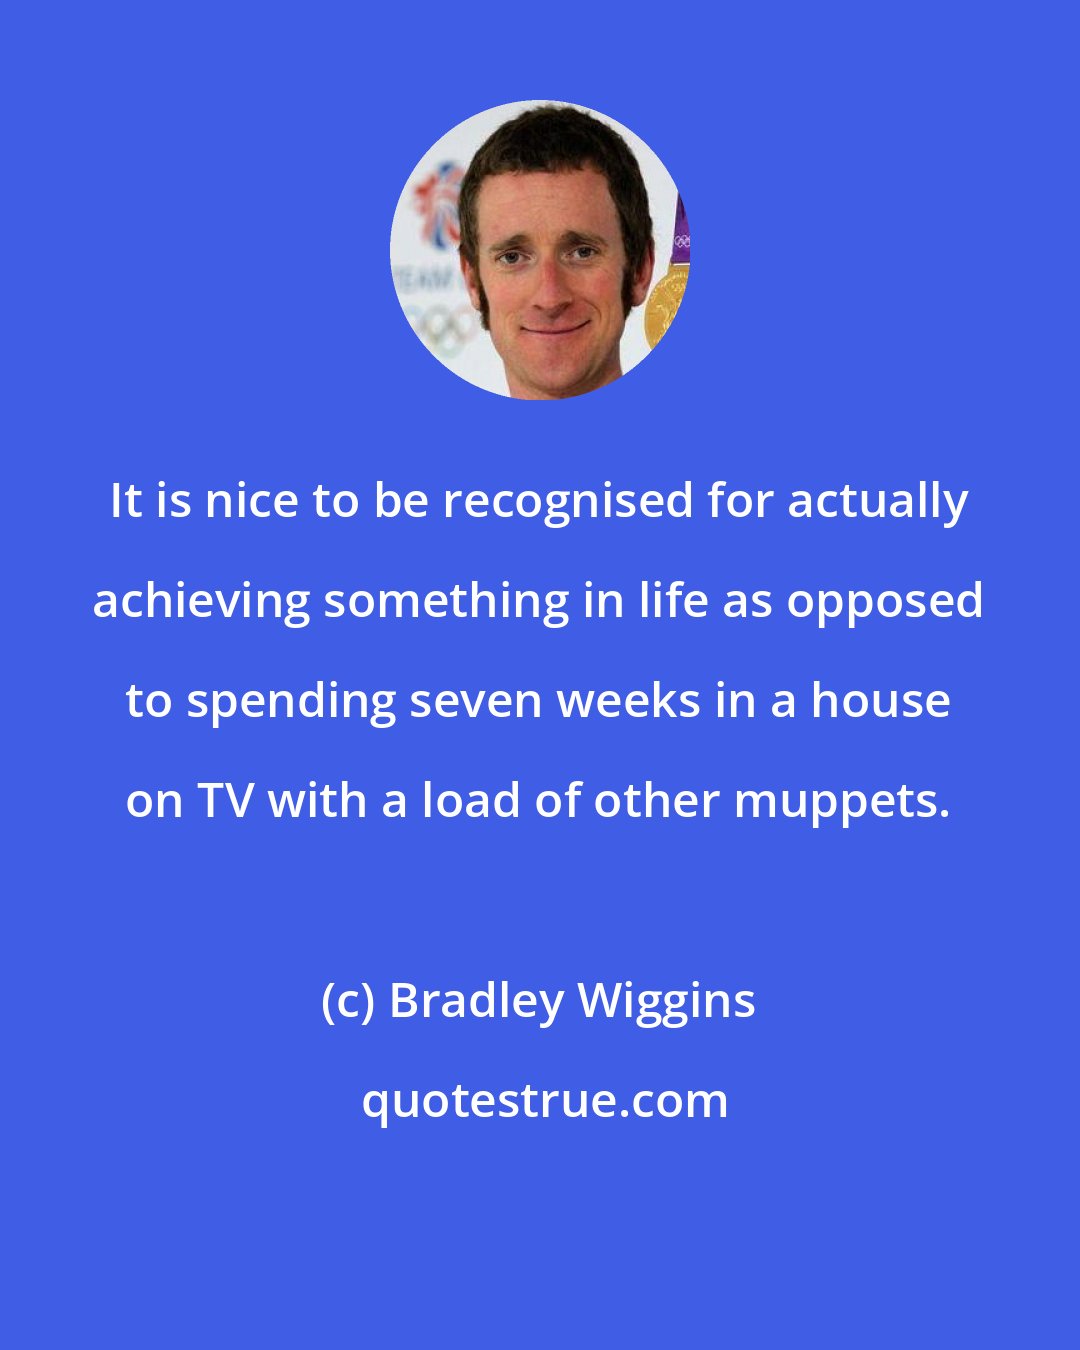 Bradley Wiggins: It is nice to be recognised for actually achieving something in life as opposed to spending seven weeks in a house on TV with a load of other muppets.